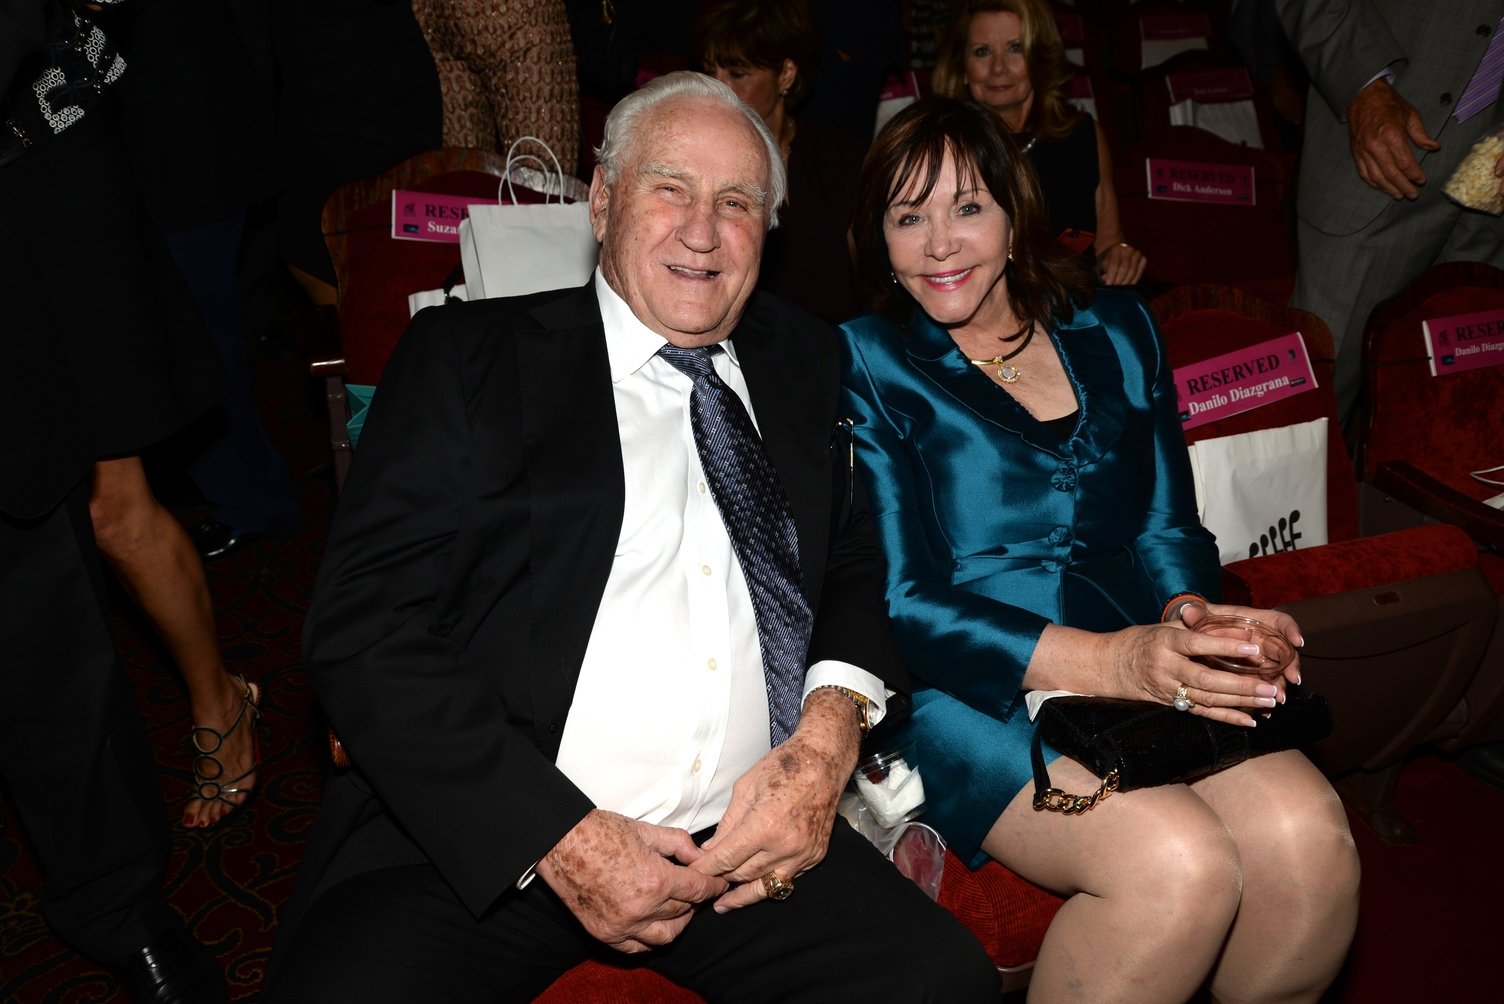 Don Shula and Mary Anne Stephens attend "An Unbreakable Bond" premiere during the Miami International Film Festival on March 11, 2014 in Miami, Florida | Photo: GettyImages